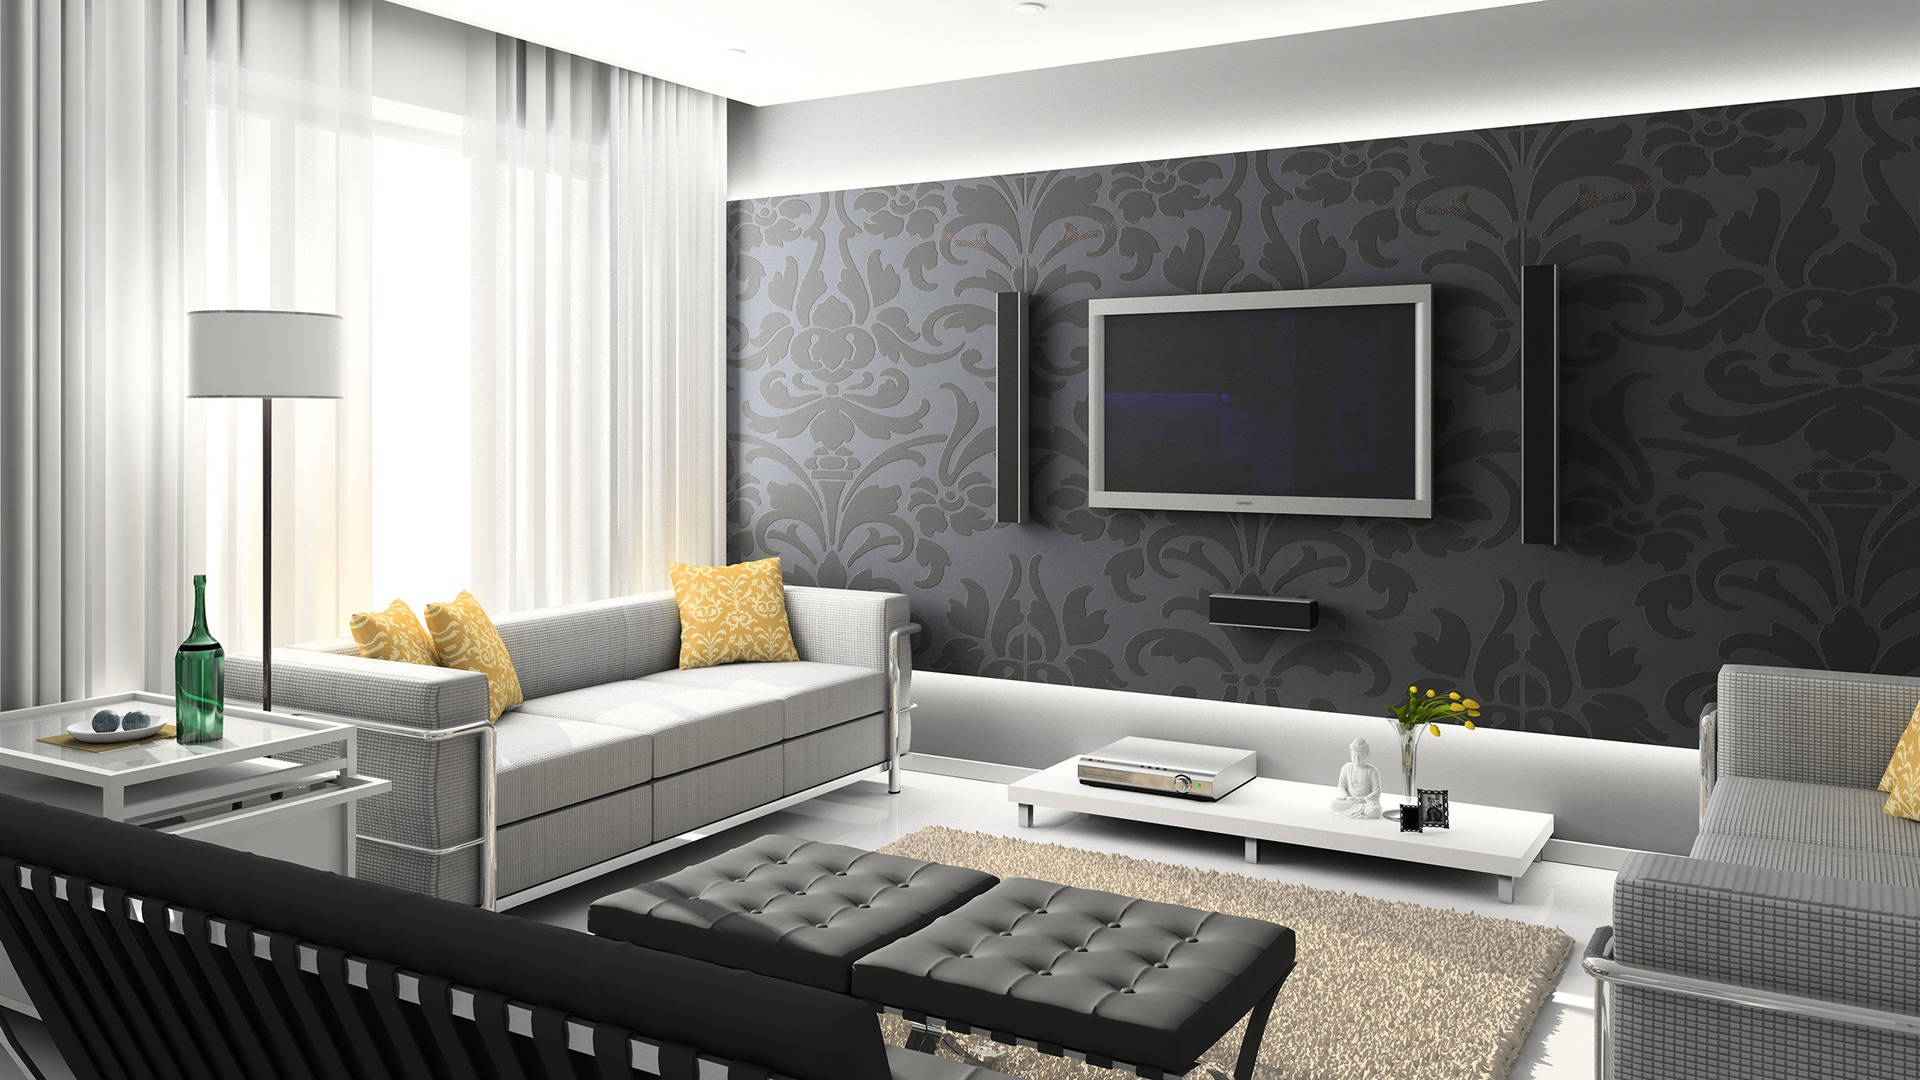 Living Room With Black Wall Paint-art Wallpaper